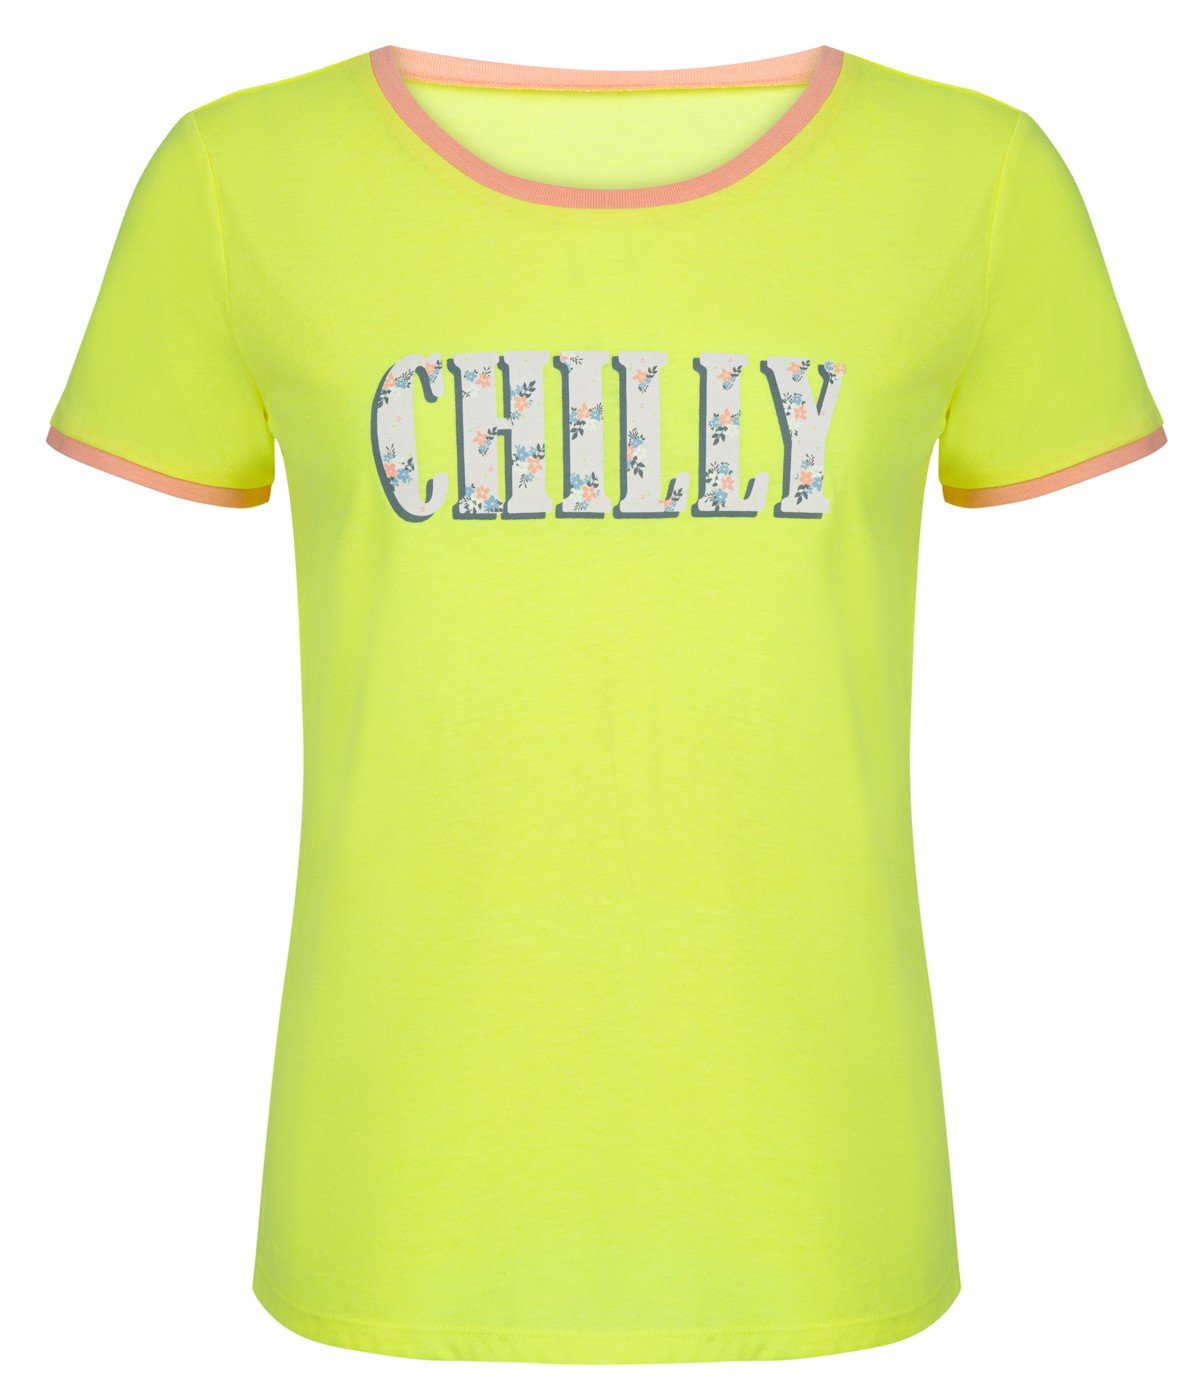 Tricou Chilly